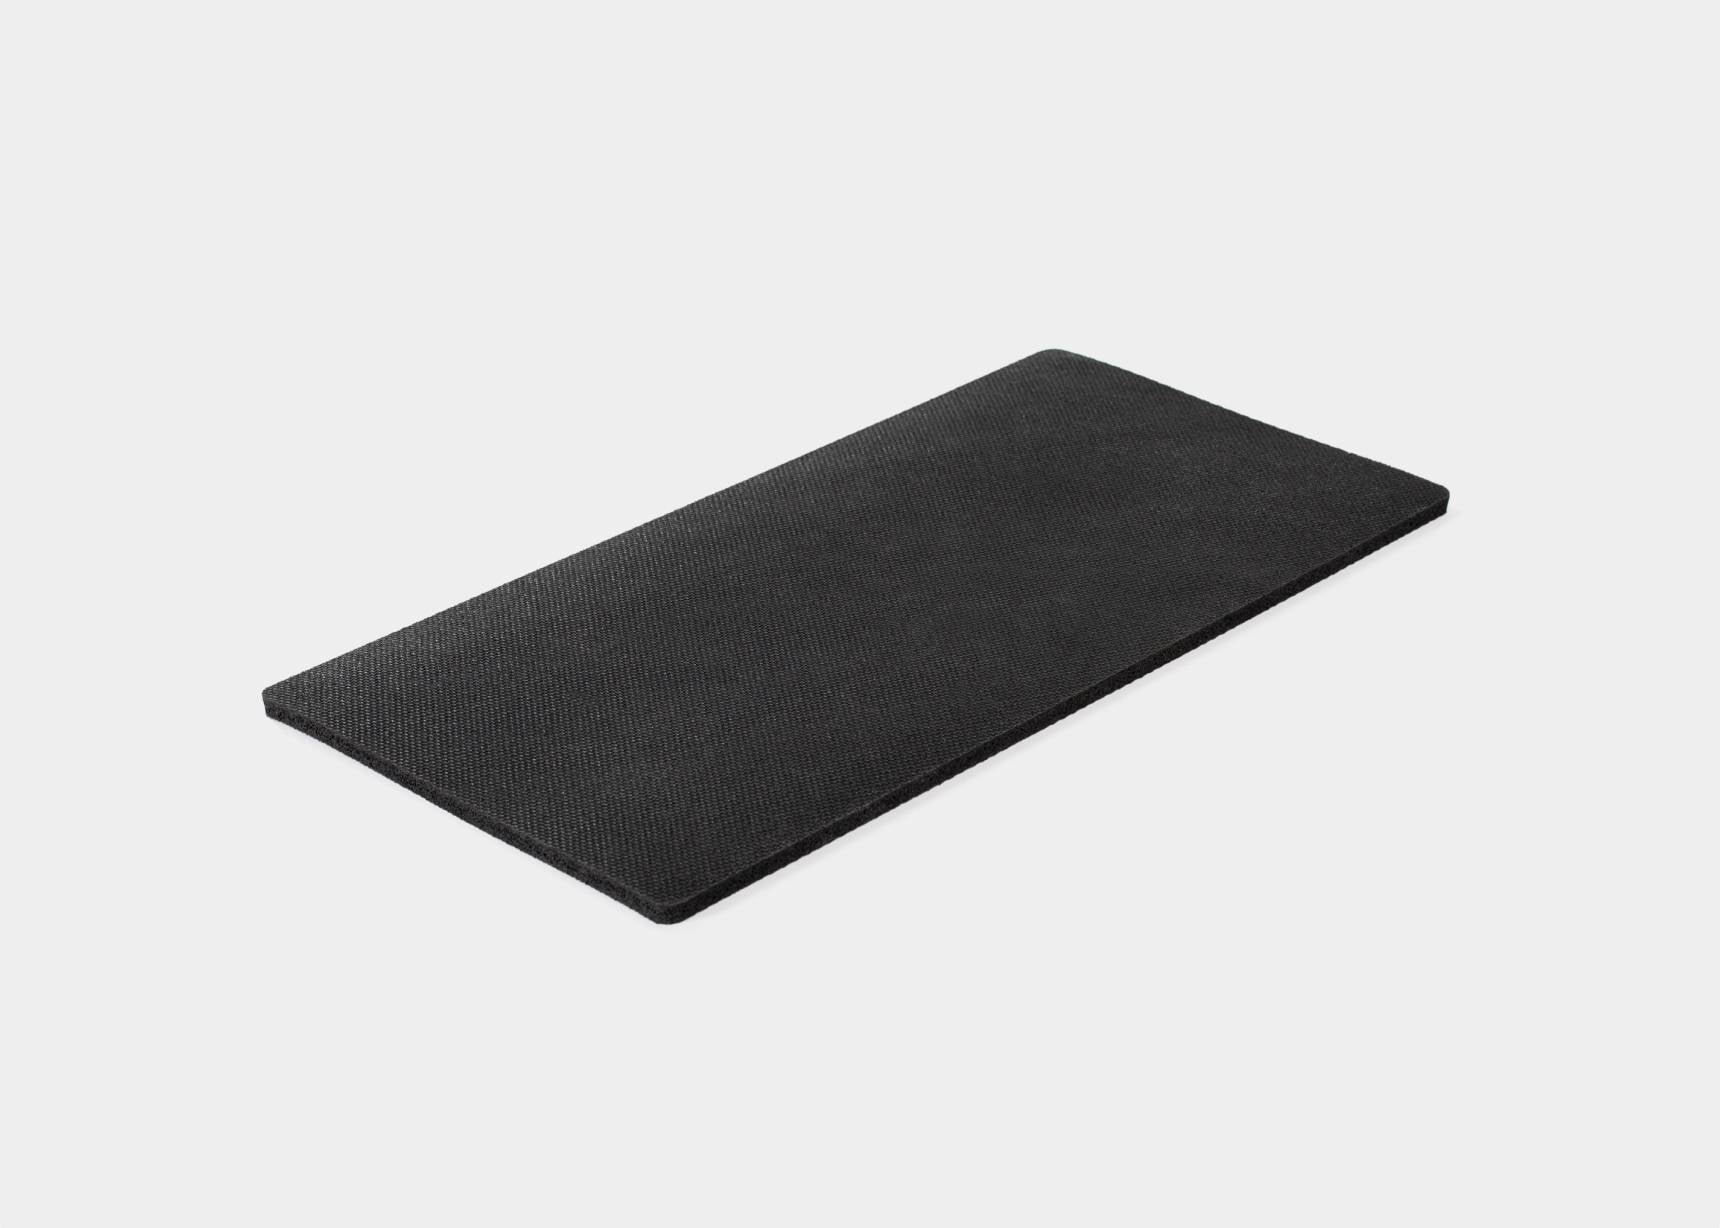 Black non-skid pad for grip and stability.